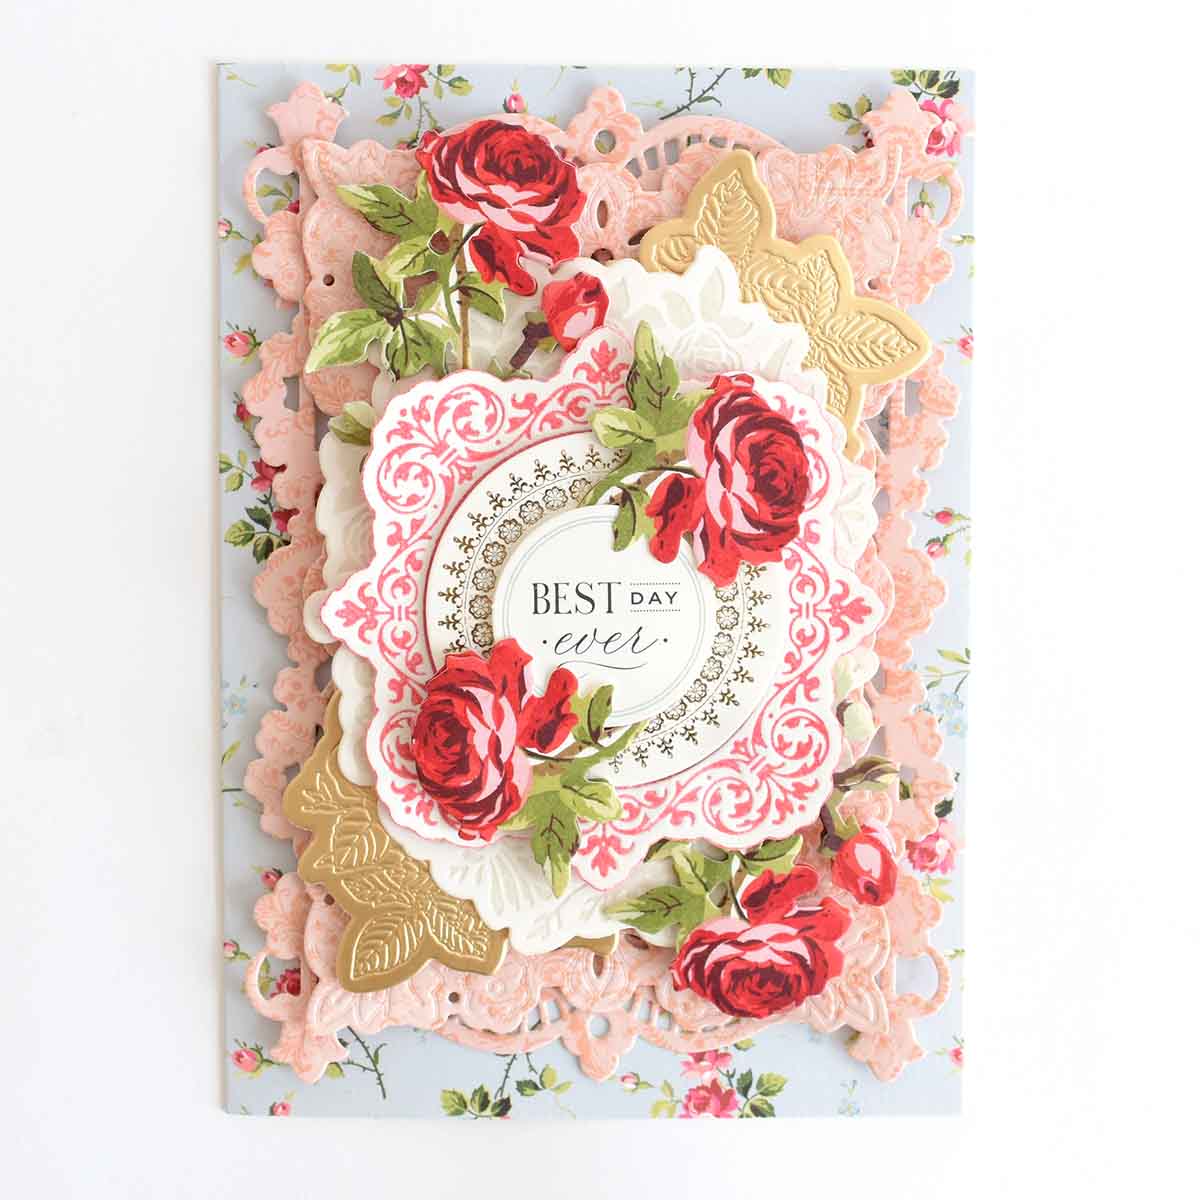 a handmade card with roses on it.